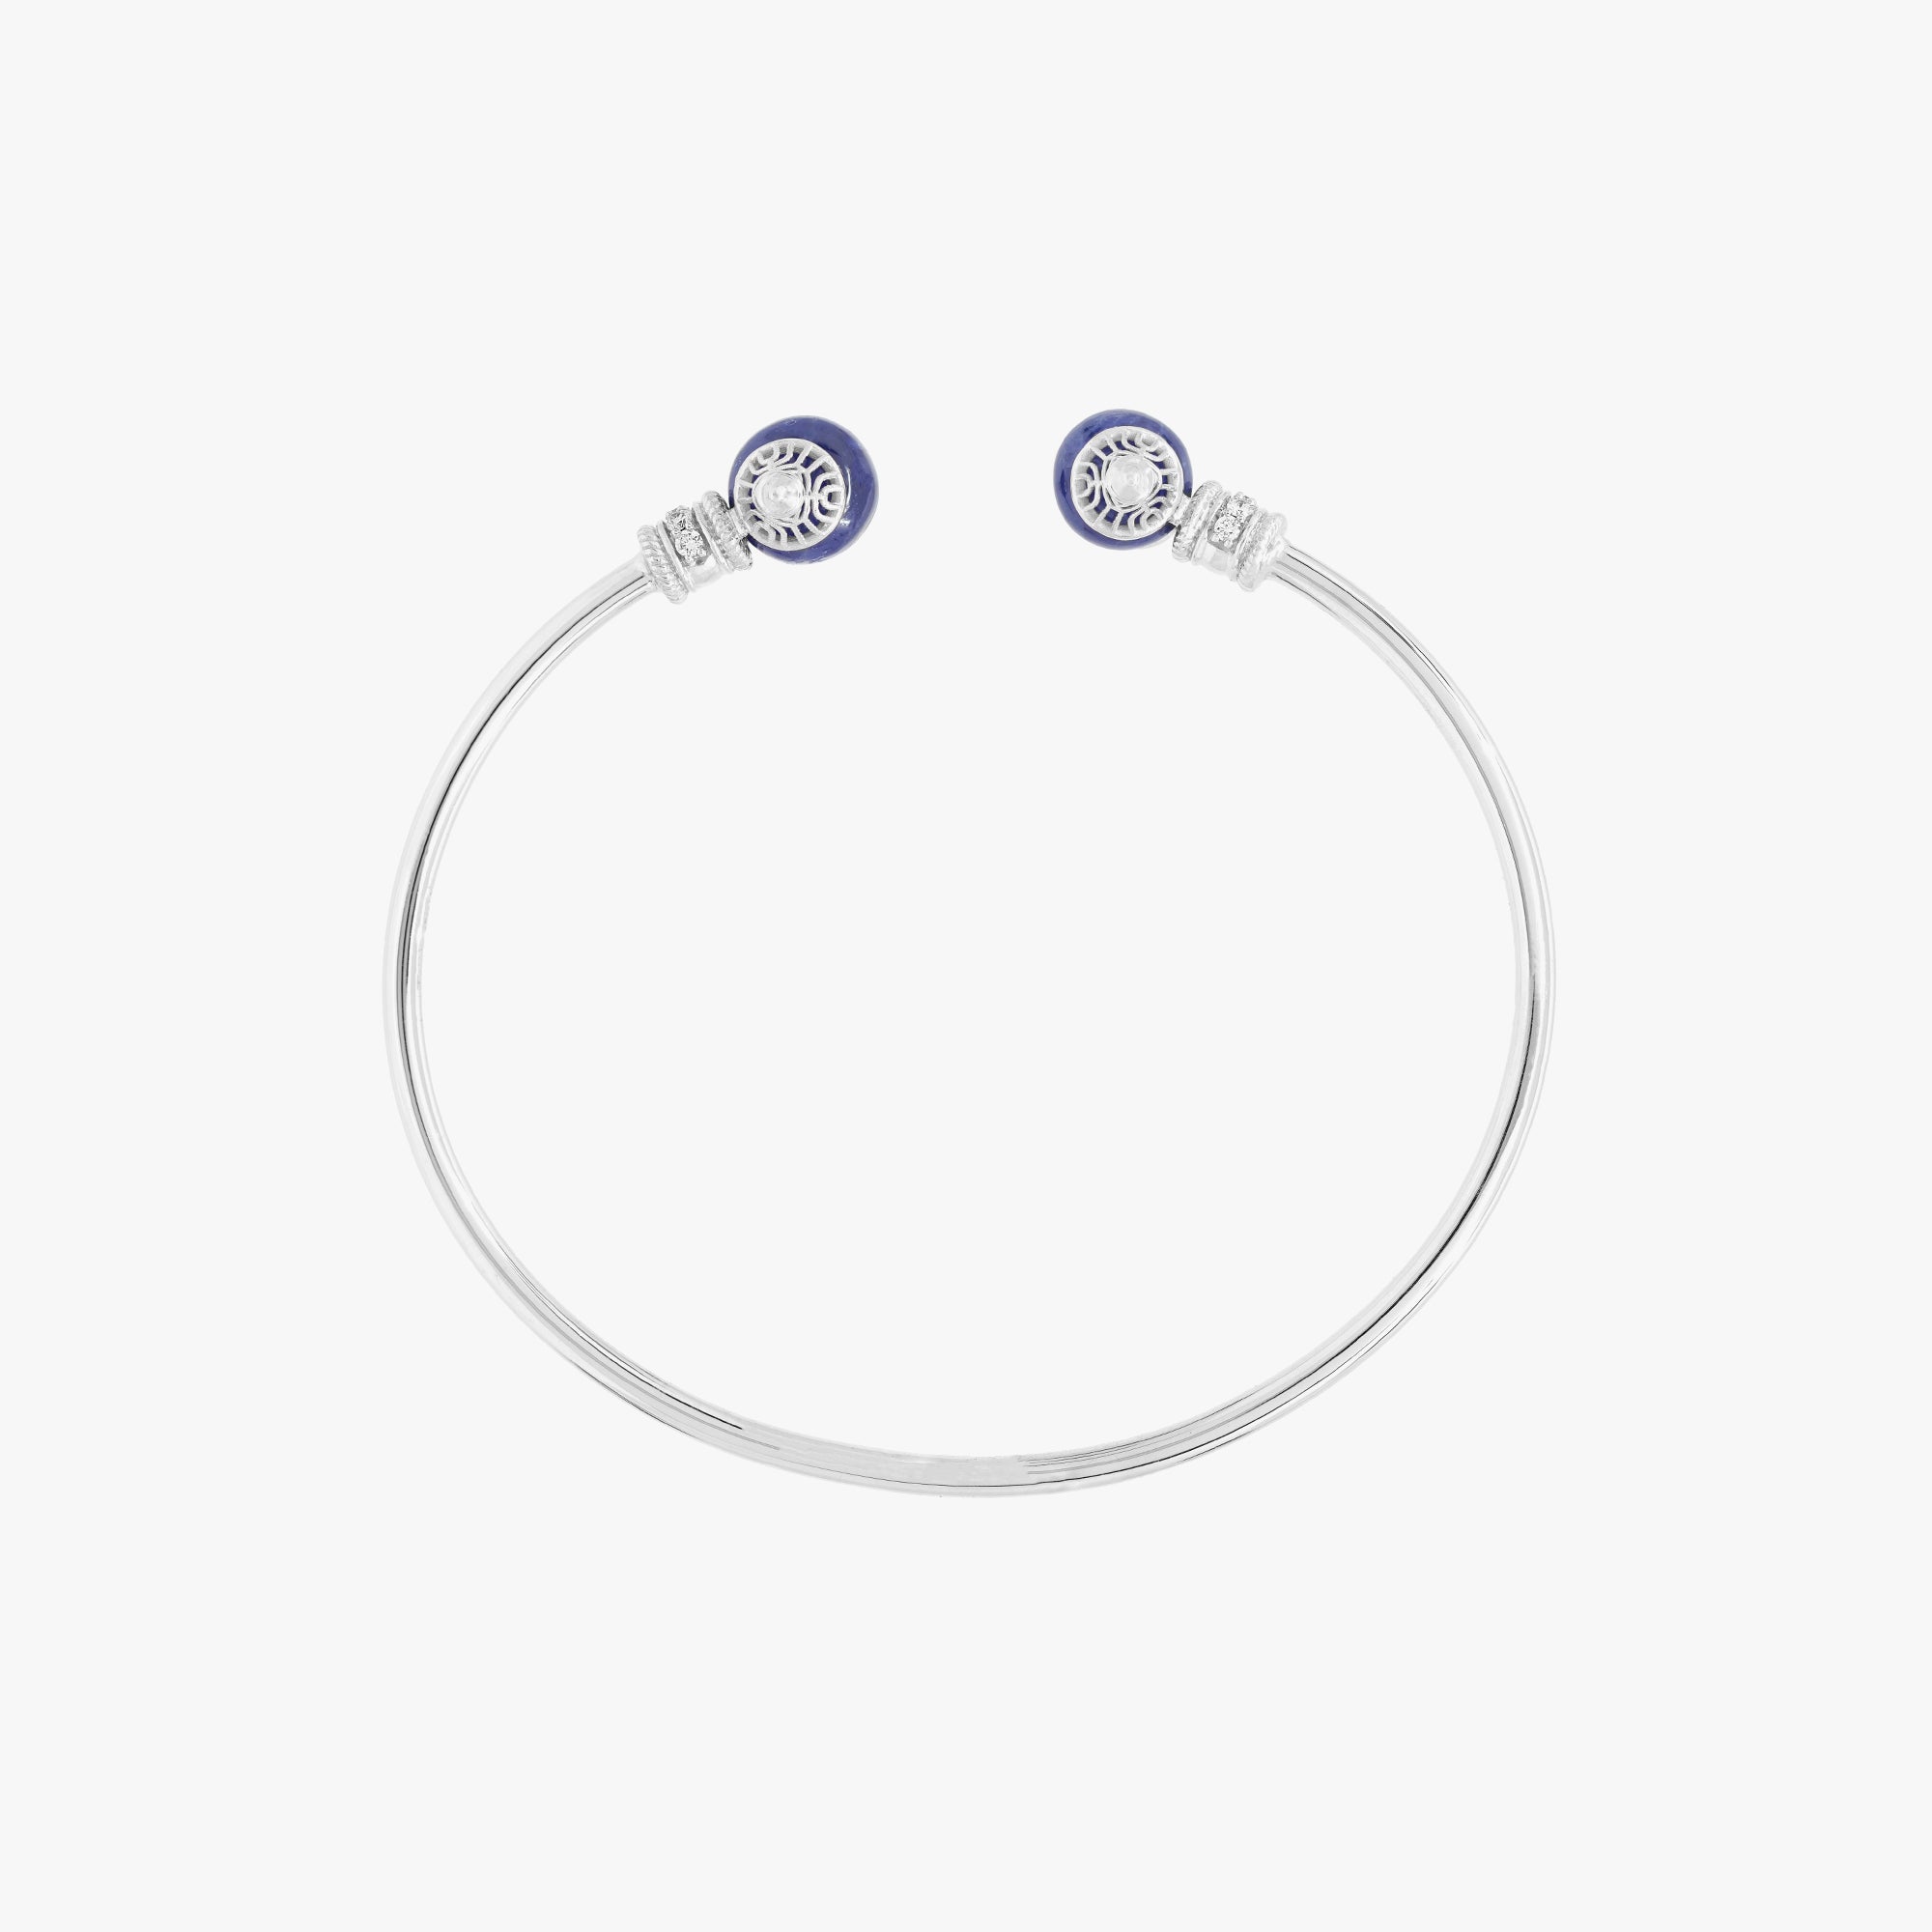 Al Merriyah mood colour bangle in 18k white gold with sapphire and diamonds